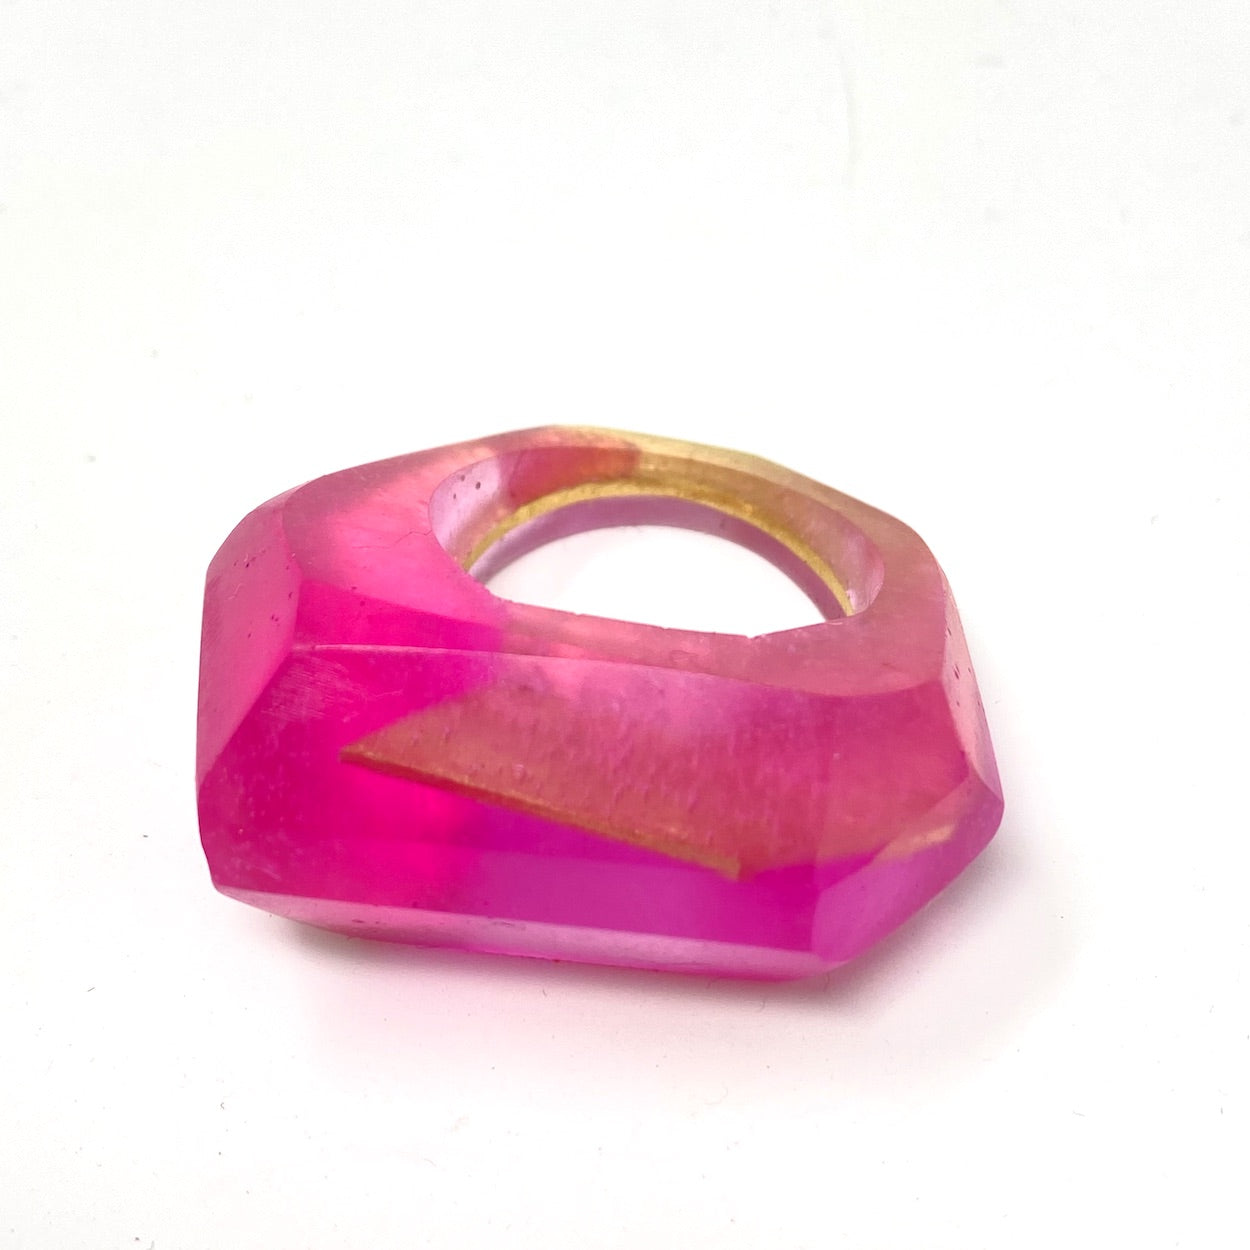 Inner Link Ring, Raspberry Pink and Silver